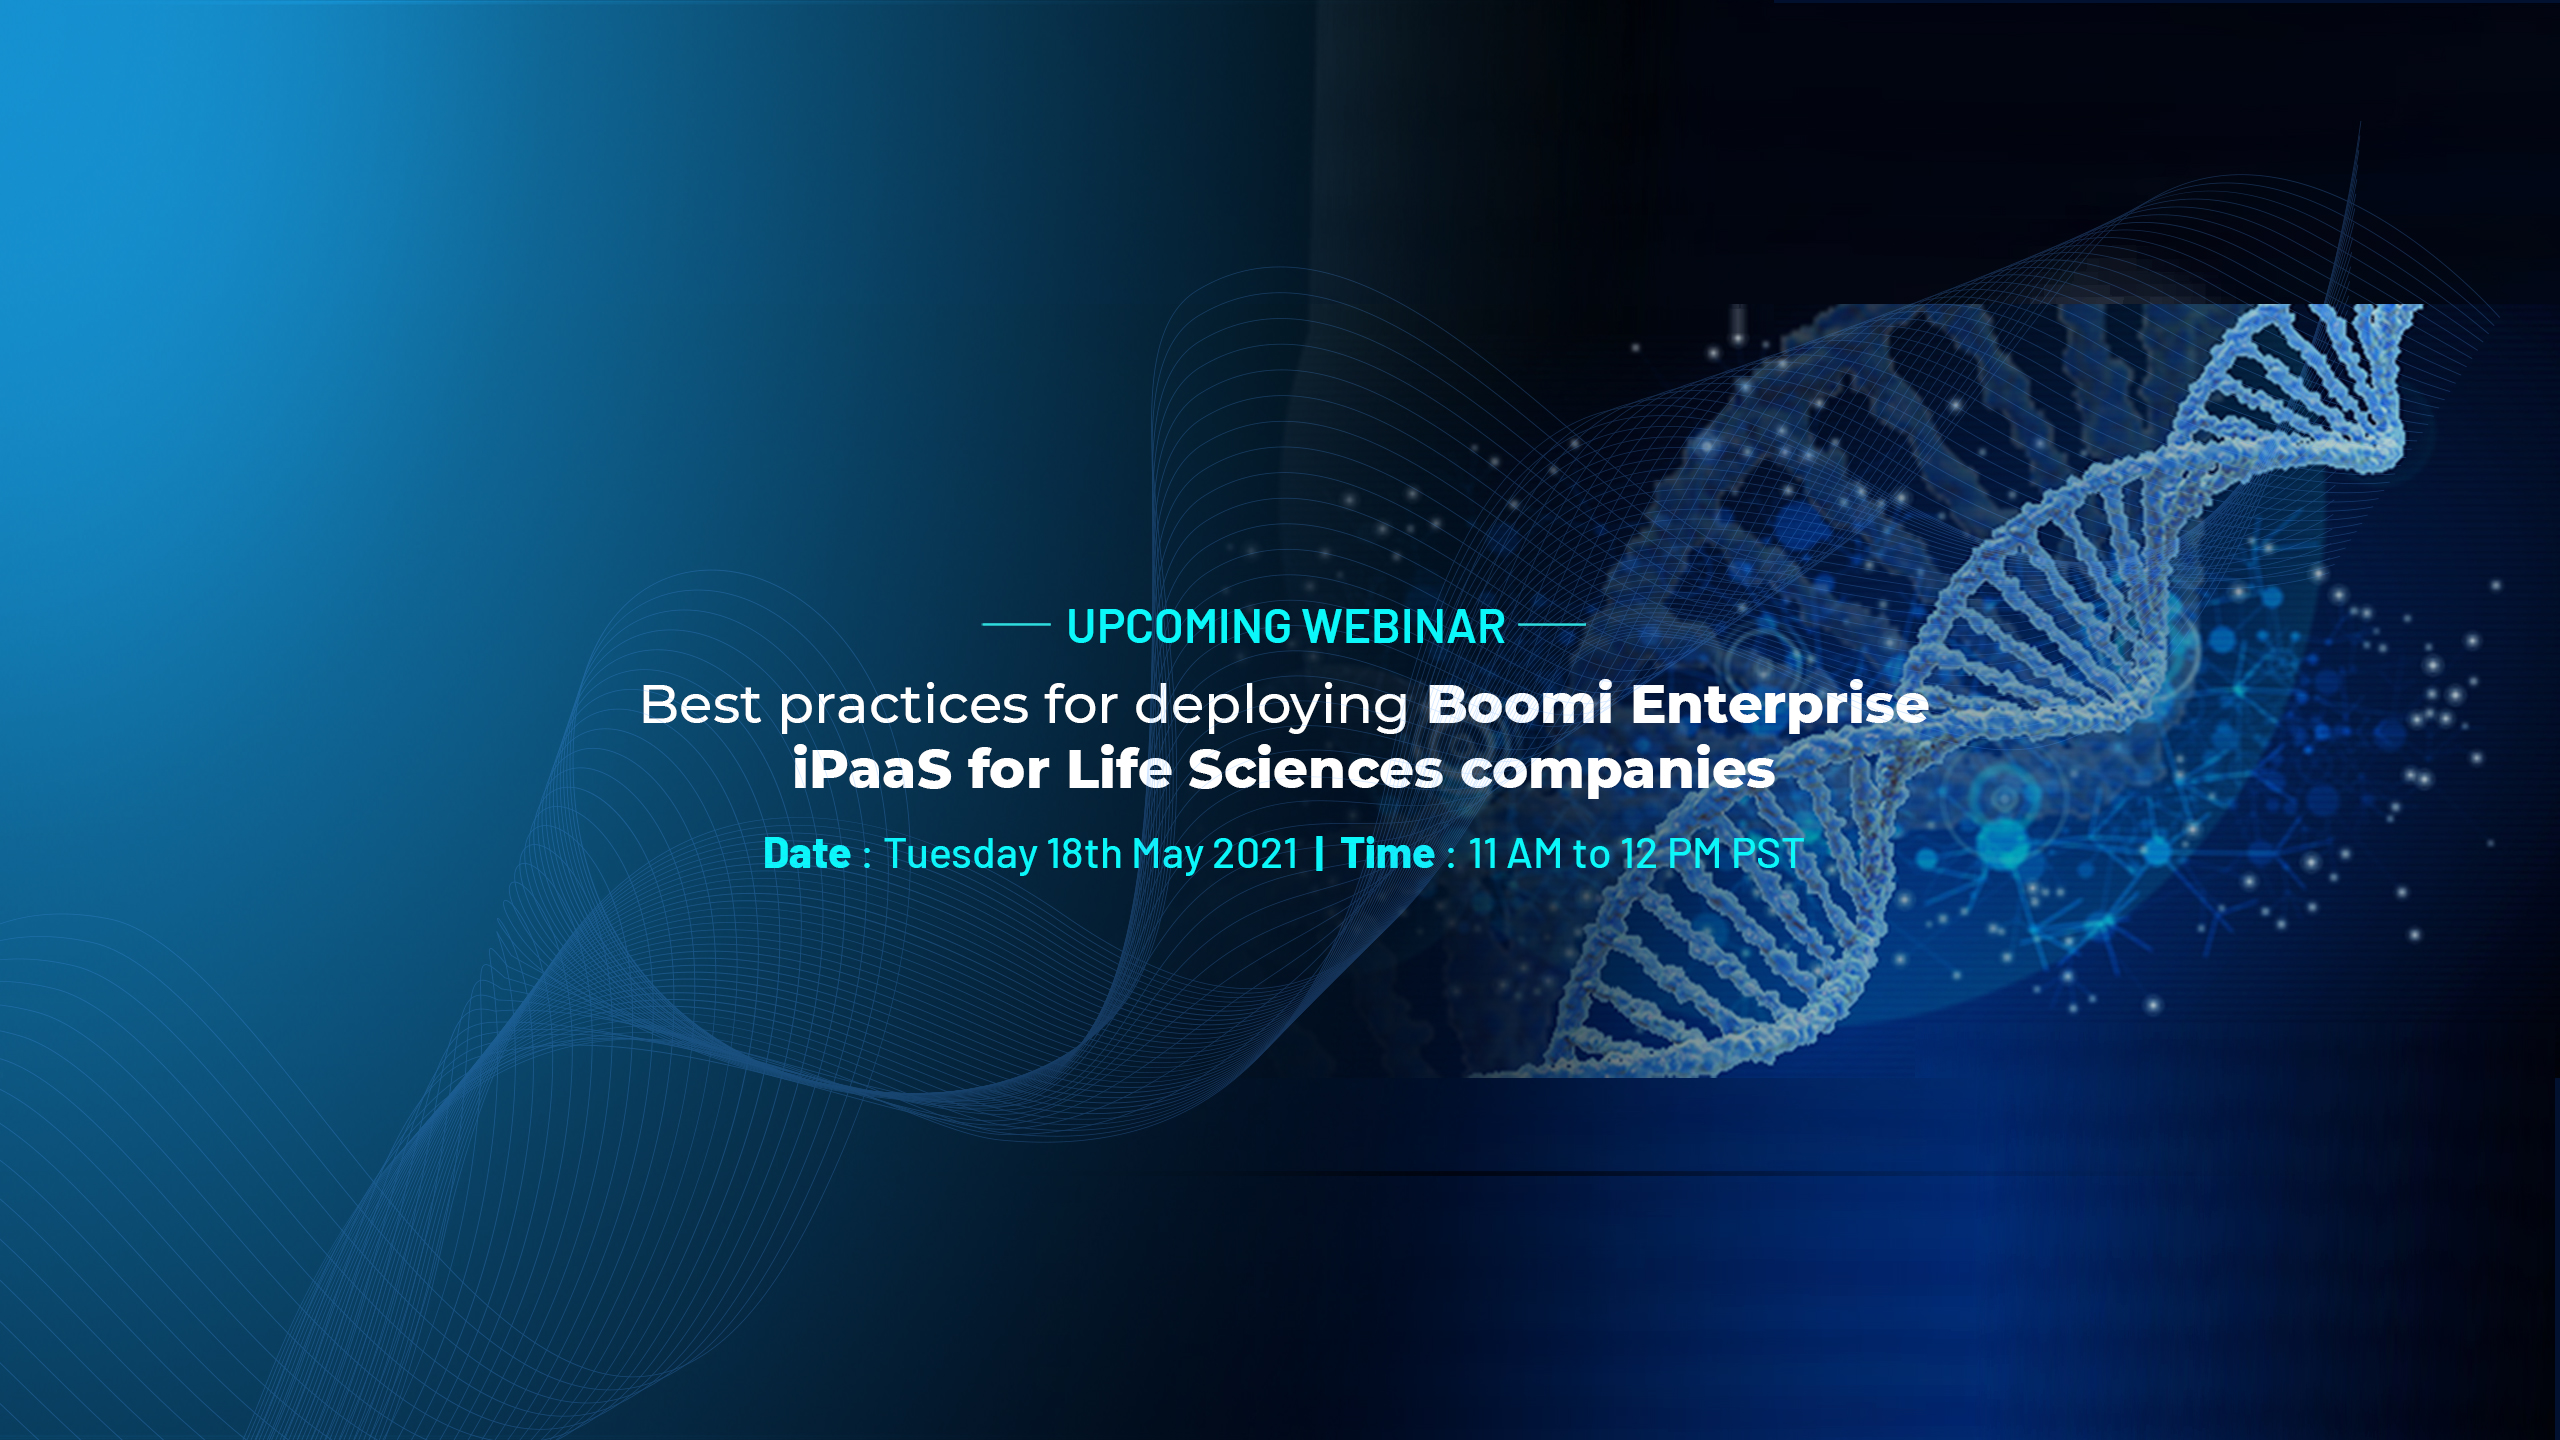 Best practices for deploying Boomi Enterprise iPaaS for Life Sciences companies, San Francisco, California, United States